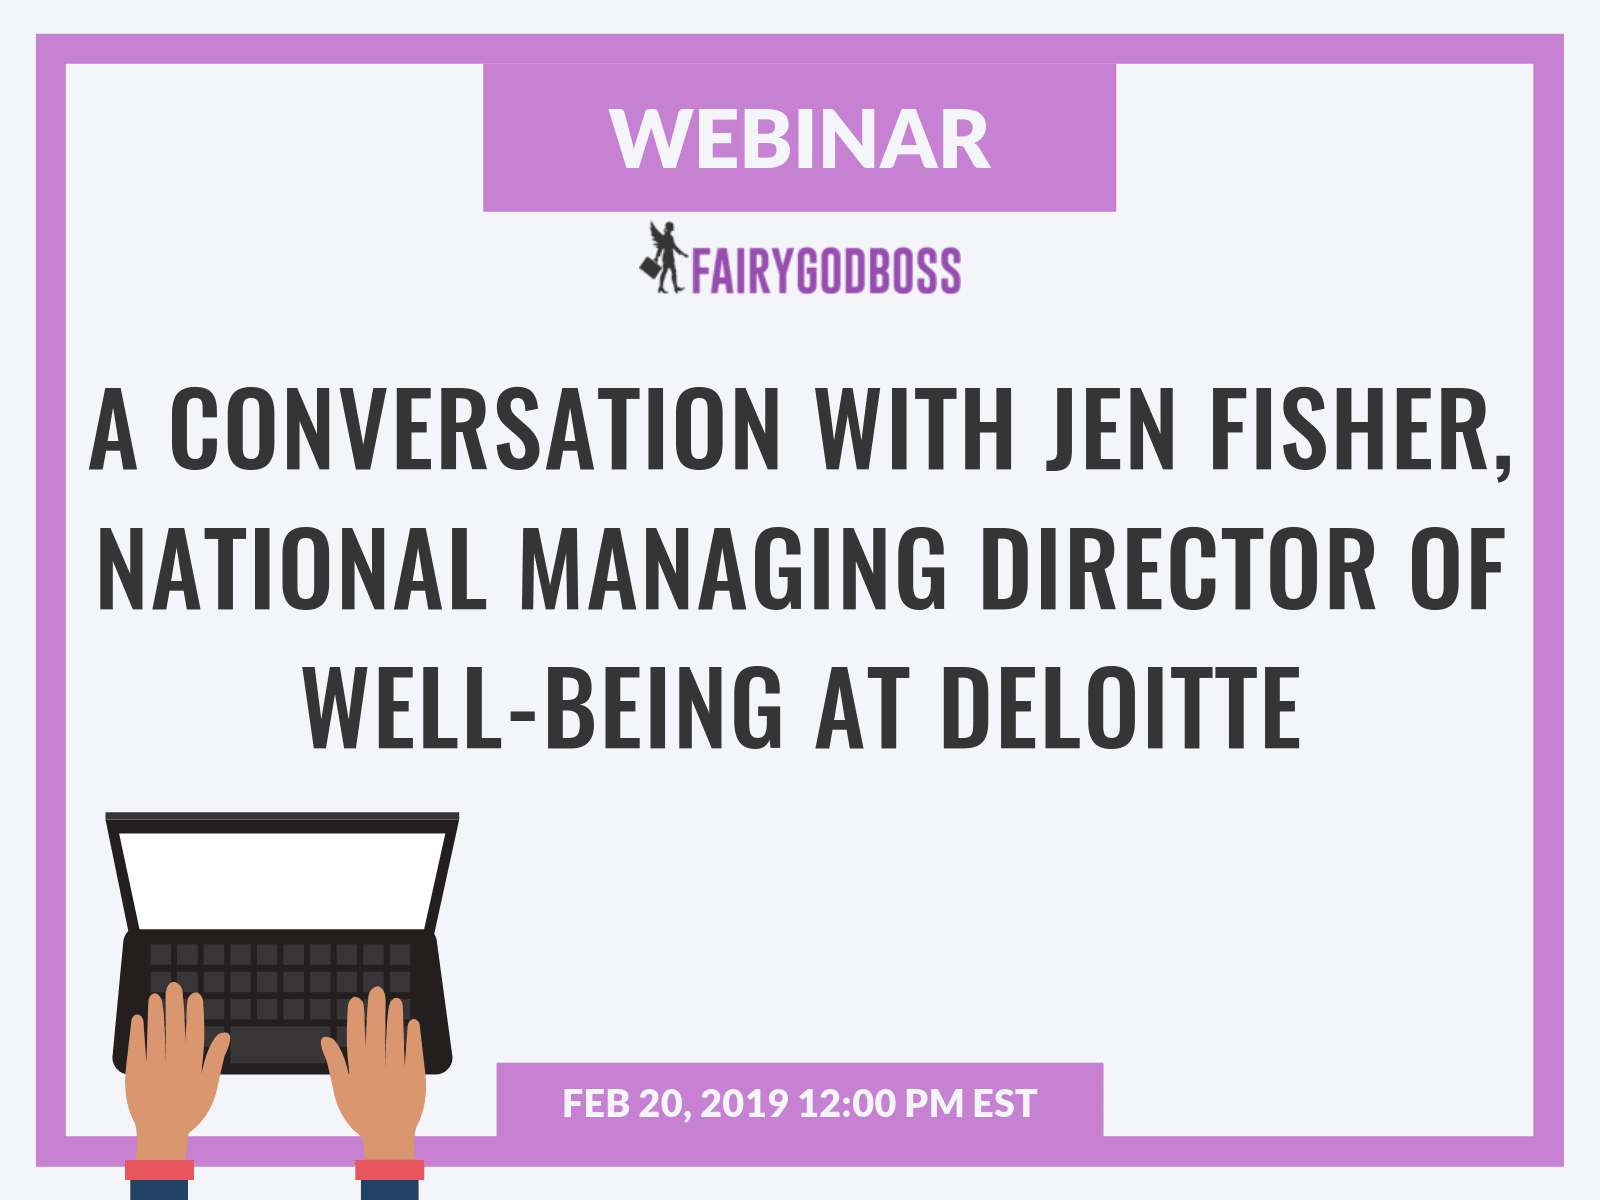 A Conversation with Jen Fisher, National Managing Director of Well-being at Deloitte